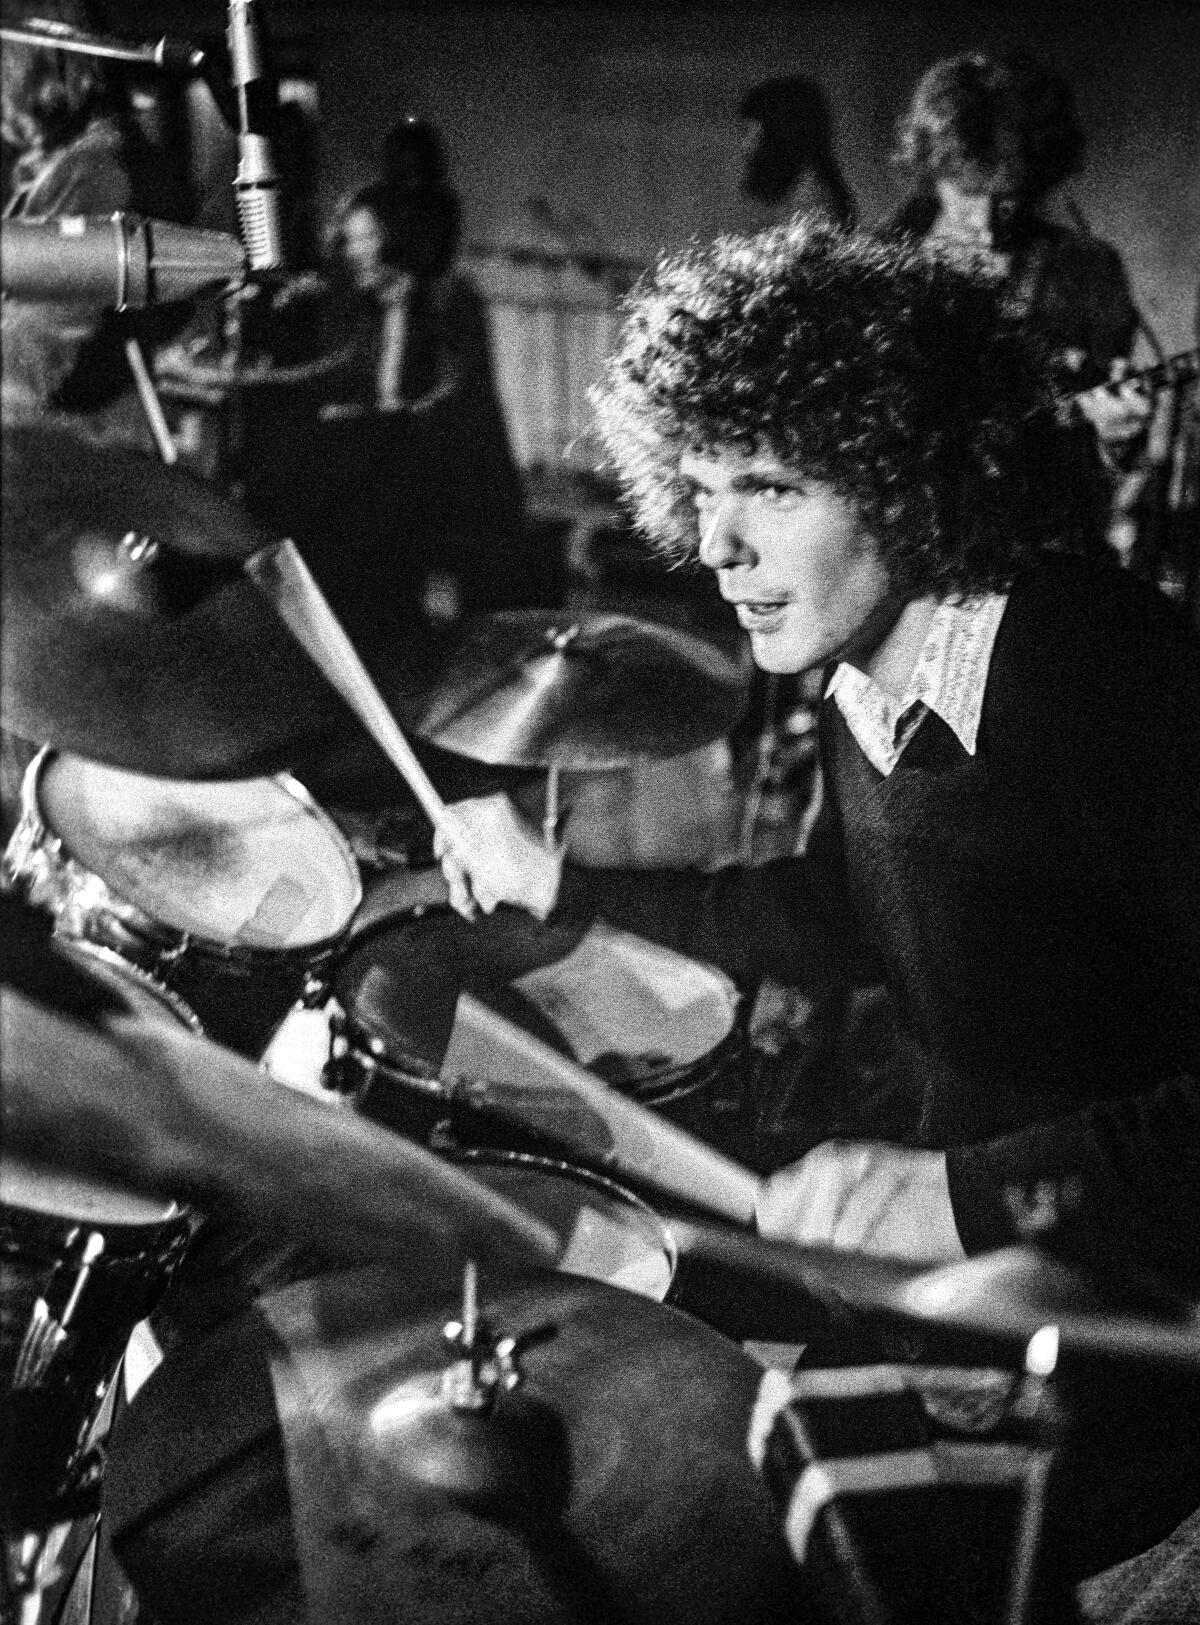 A black-and-white photo of Jim Gordon, with curly hair, playing drums.